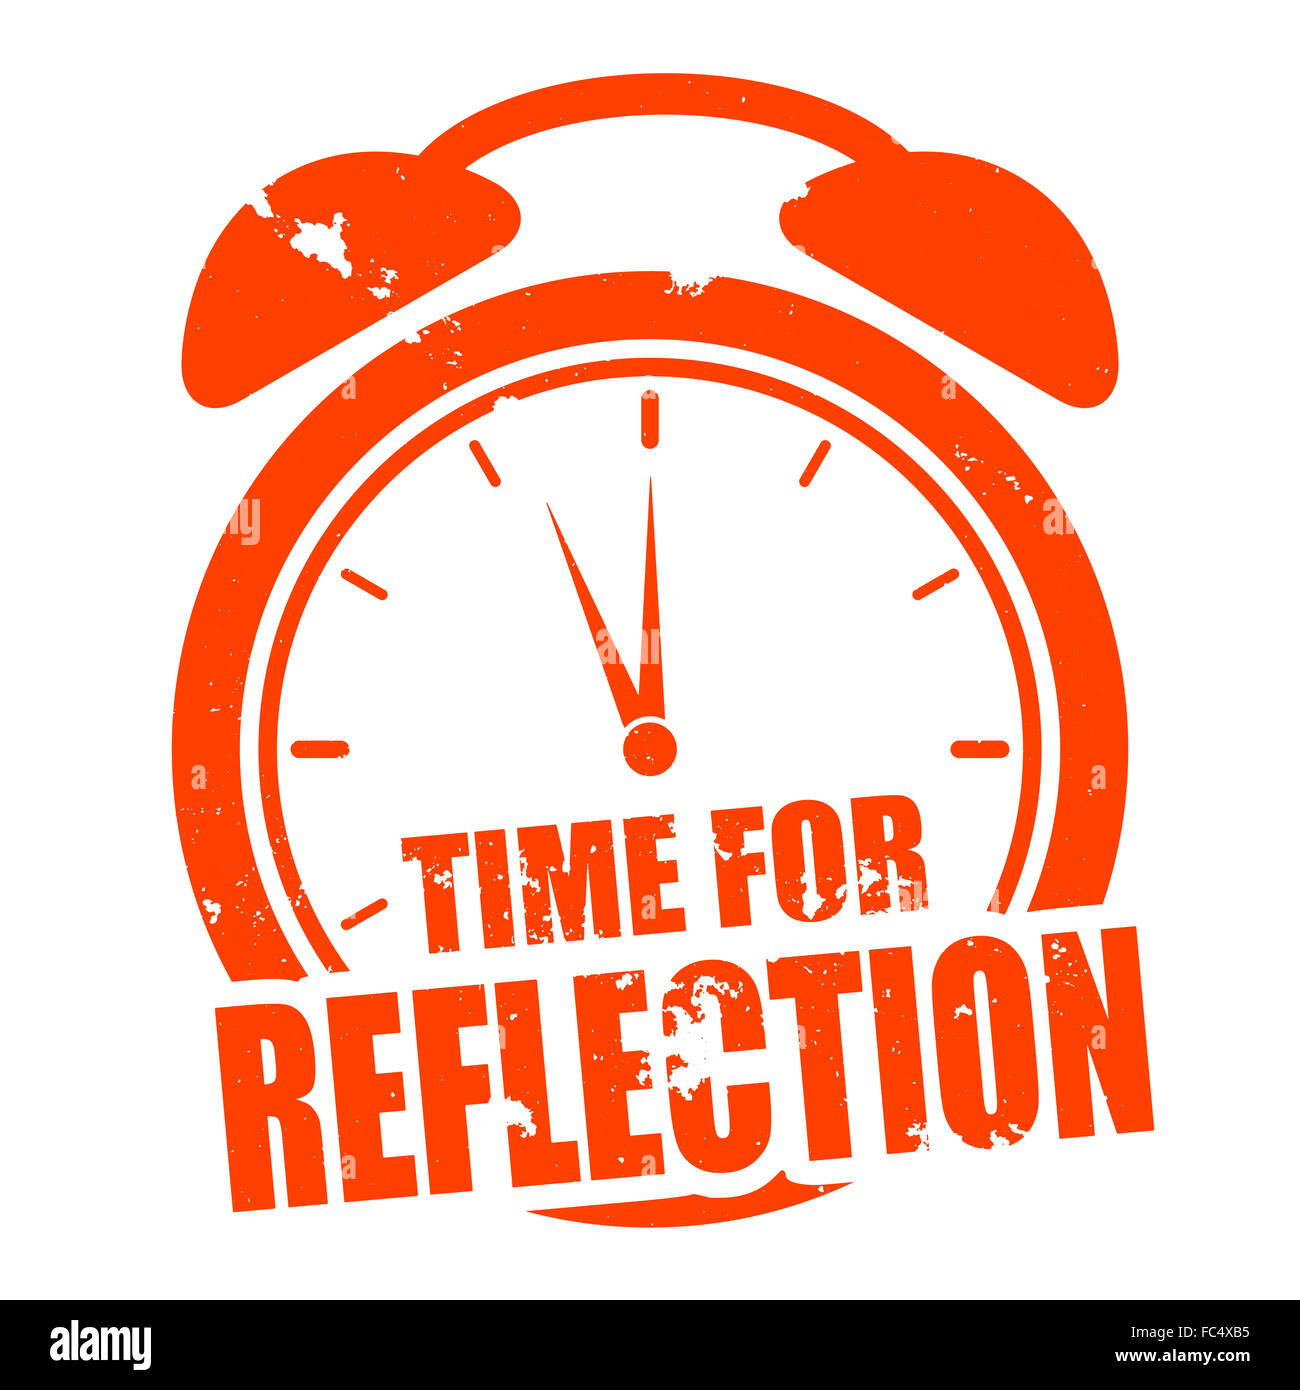 Time for Reflection Stock Photo